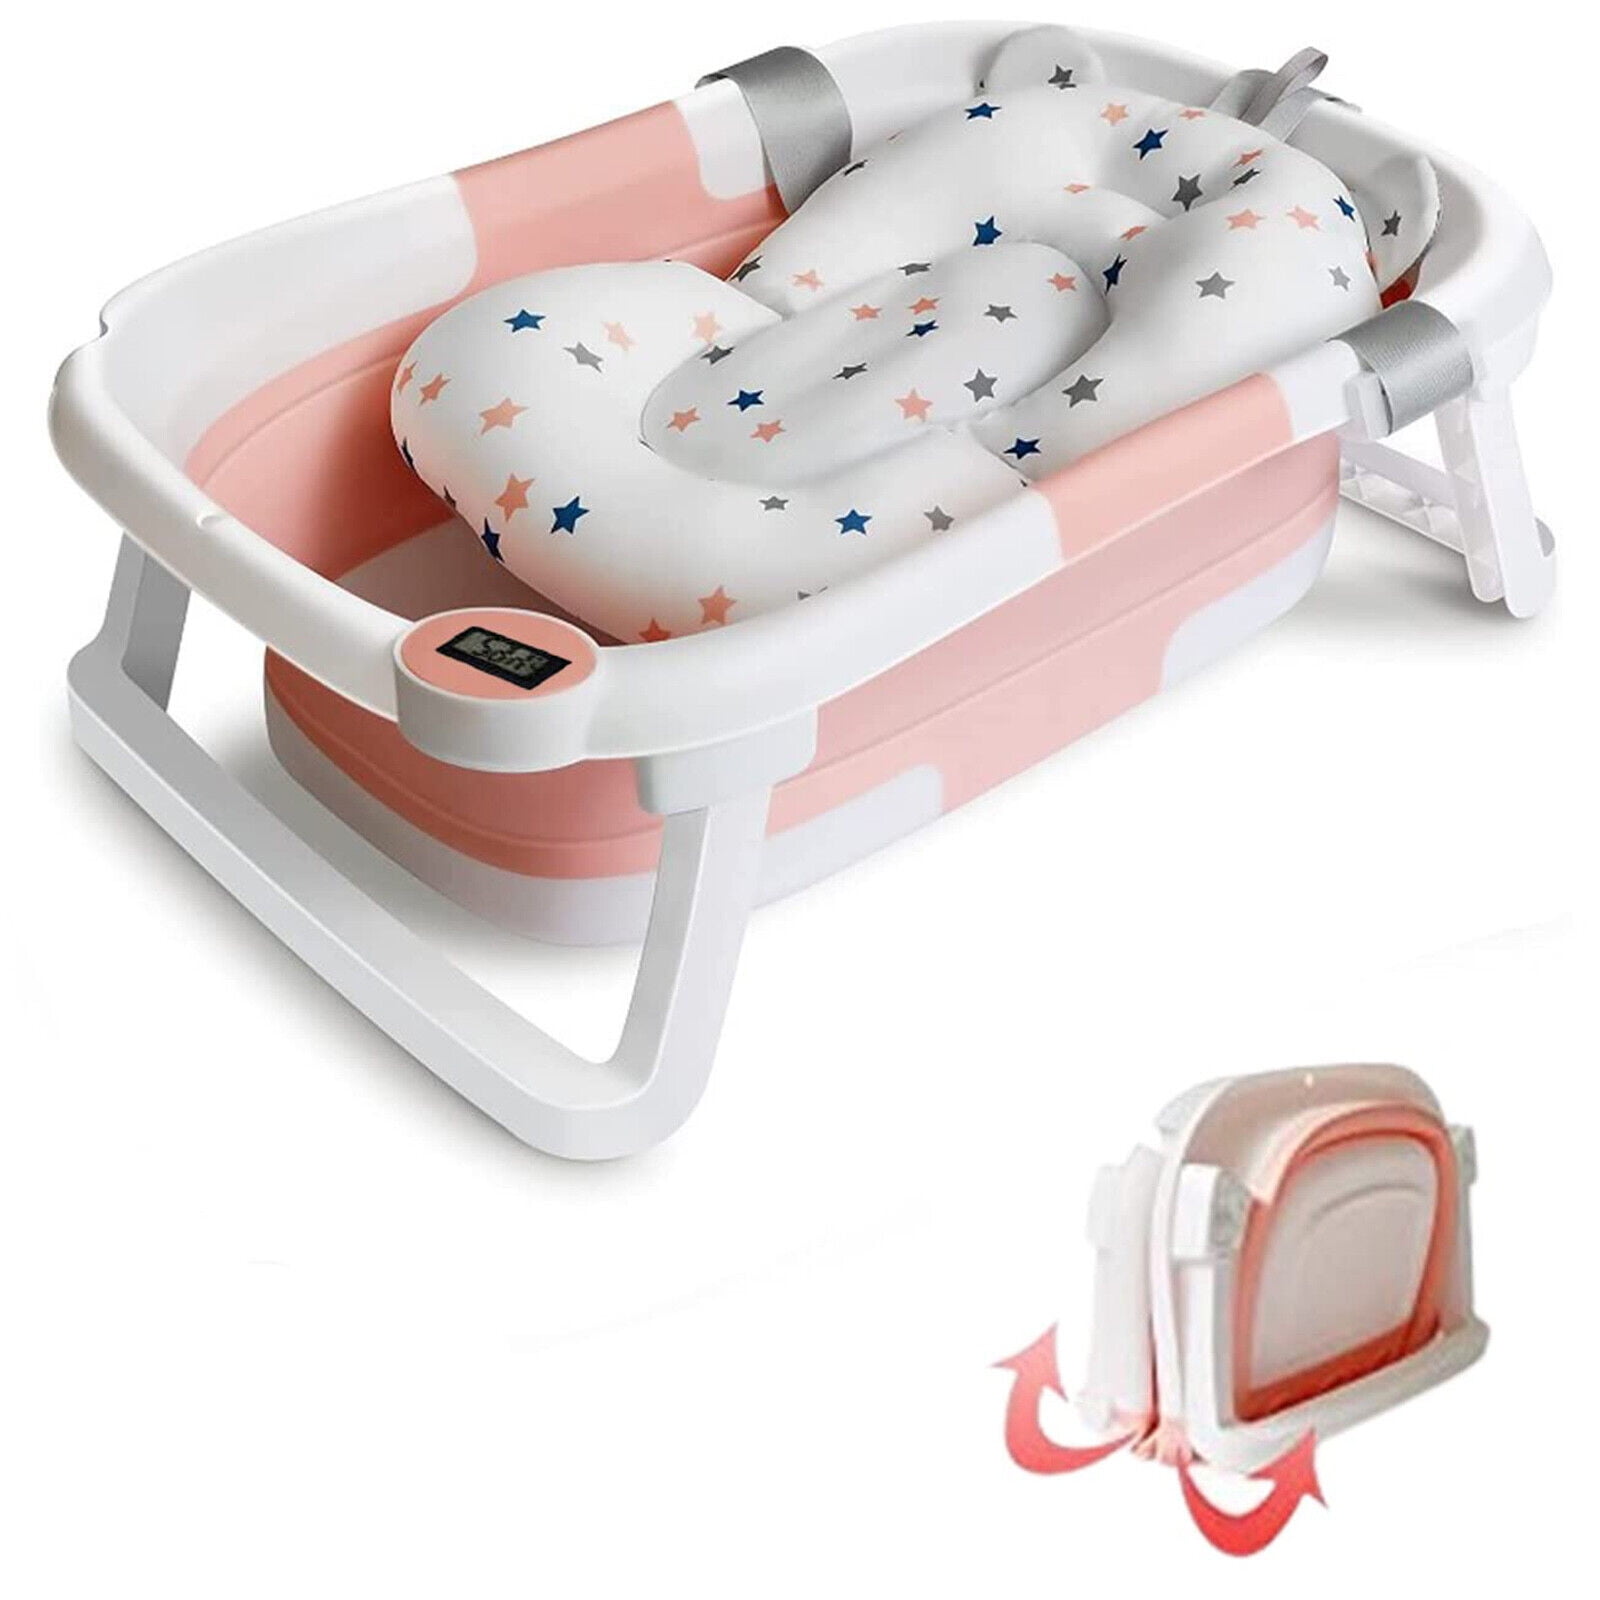 Aiwanto Collapsible Folding Baby Tub with Cushion Toys Body Temperature  Sensing Collapsible Tub for Toddler Kids80 50CM Buy, Best Price in Russia,  Moscow, Saint Petersburg